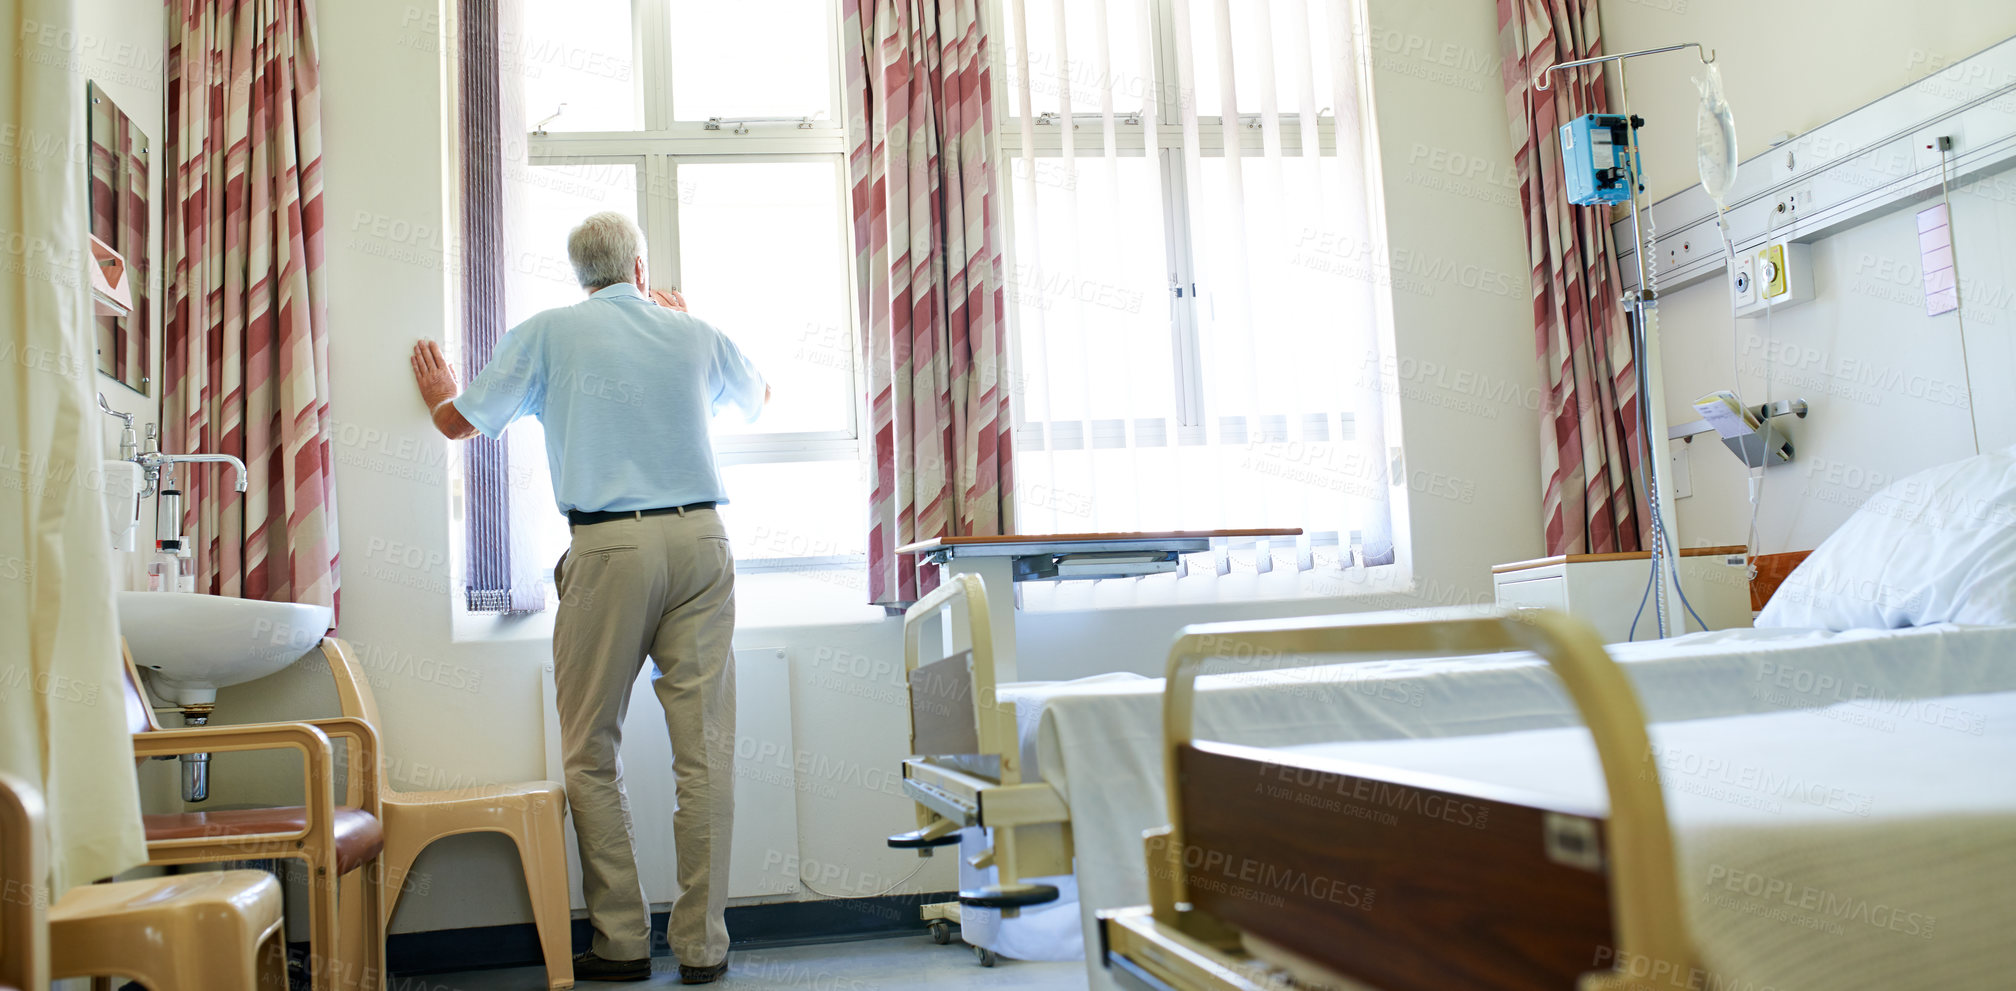 Buy stock photo Shot of a senior man looking out a window while he waits in a hospital ward